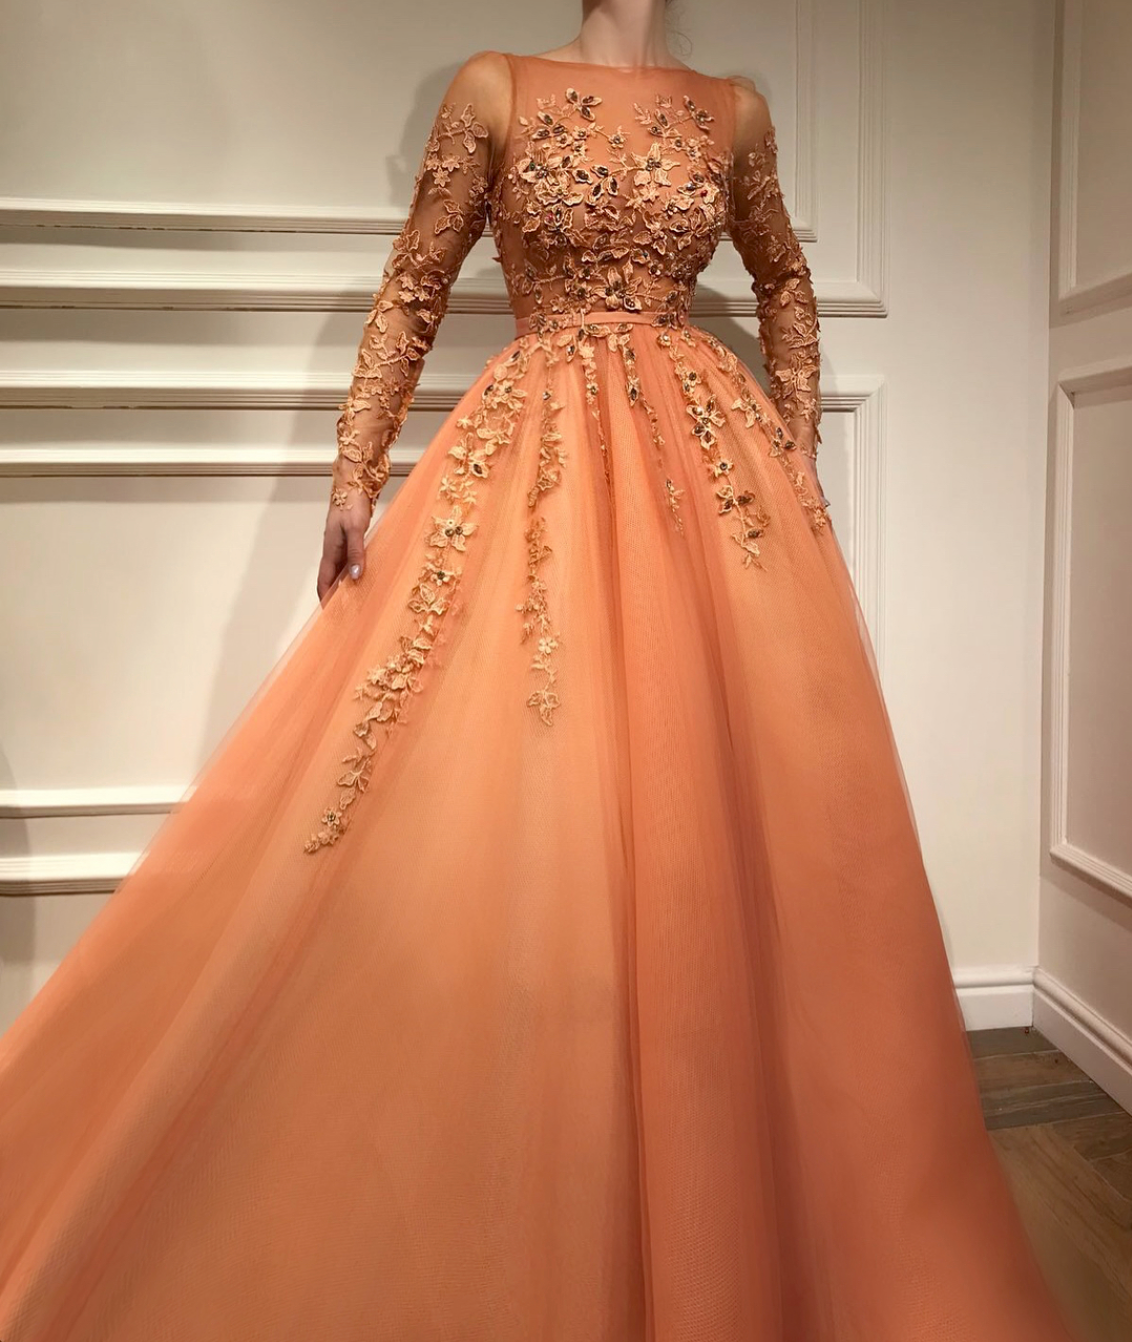 Peach A-Line dress with long sleeves and embroidery